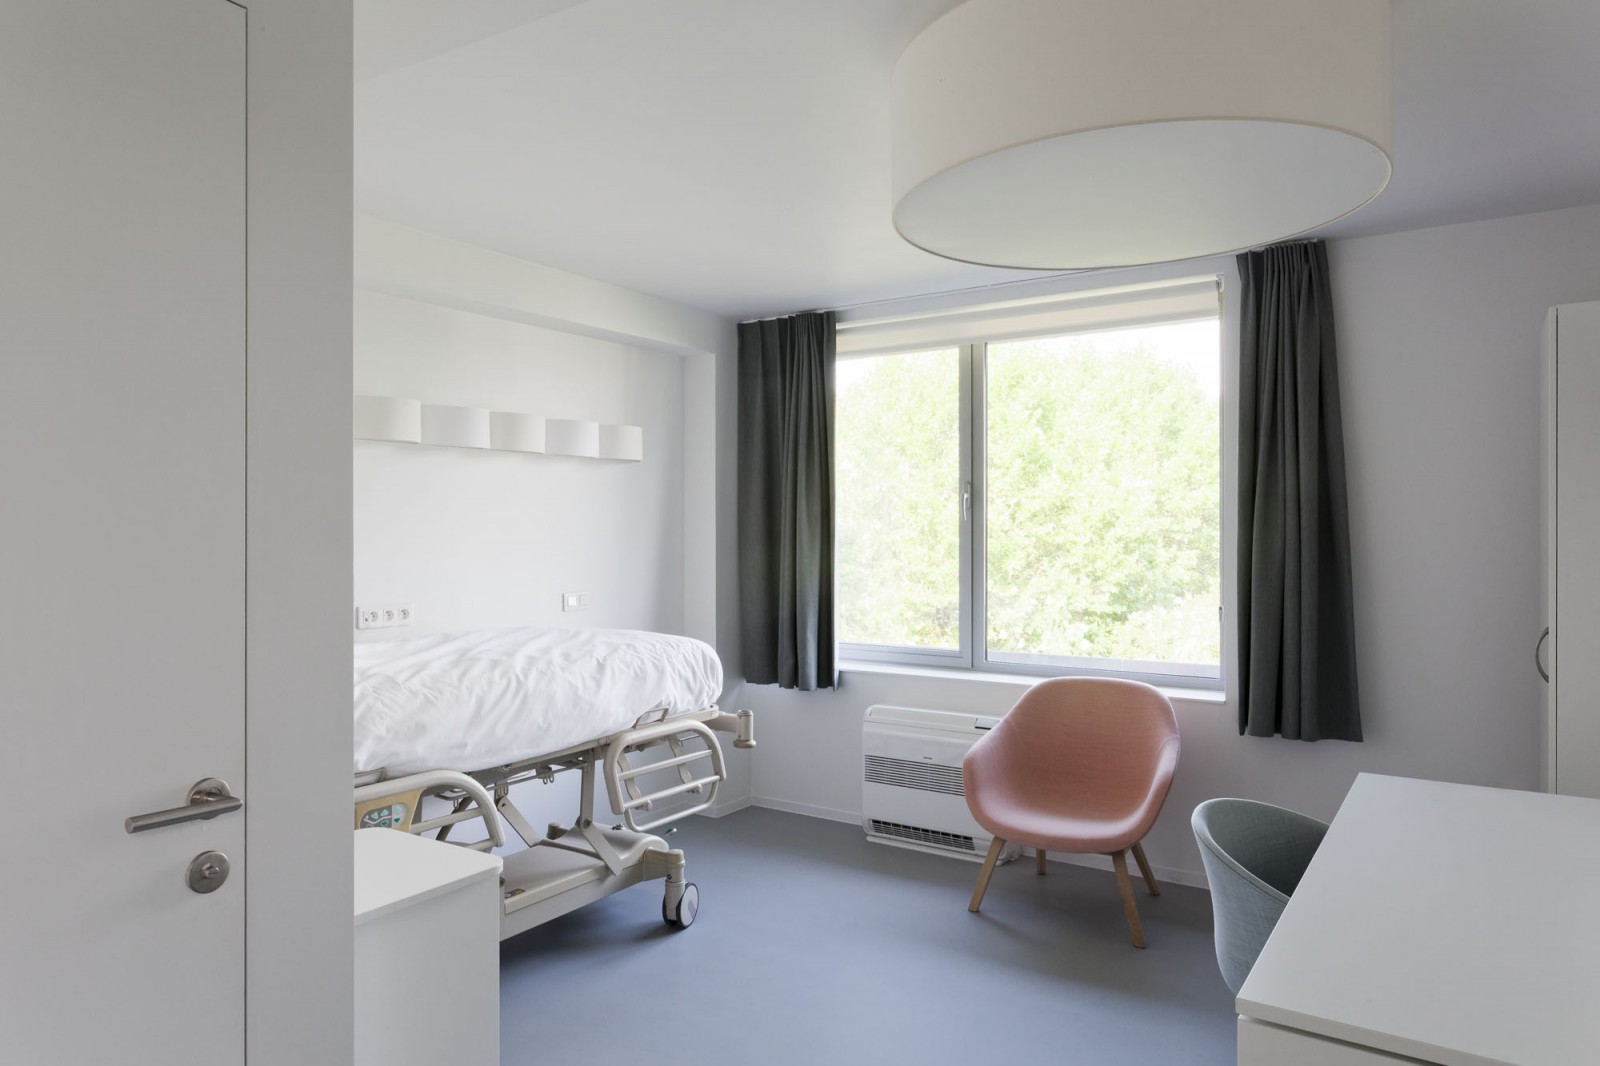 A single room in the guesthouse at o2 Clinic, including a hospital bed, desk and wardrobe.